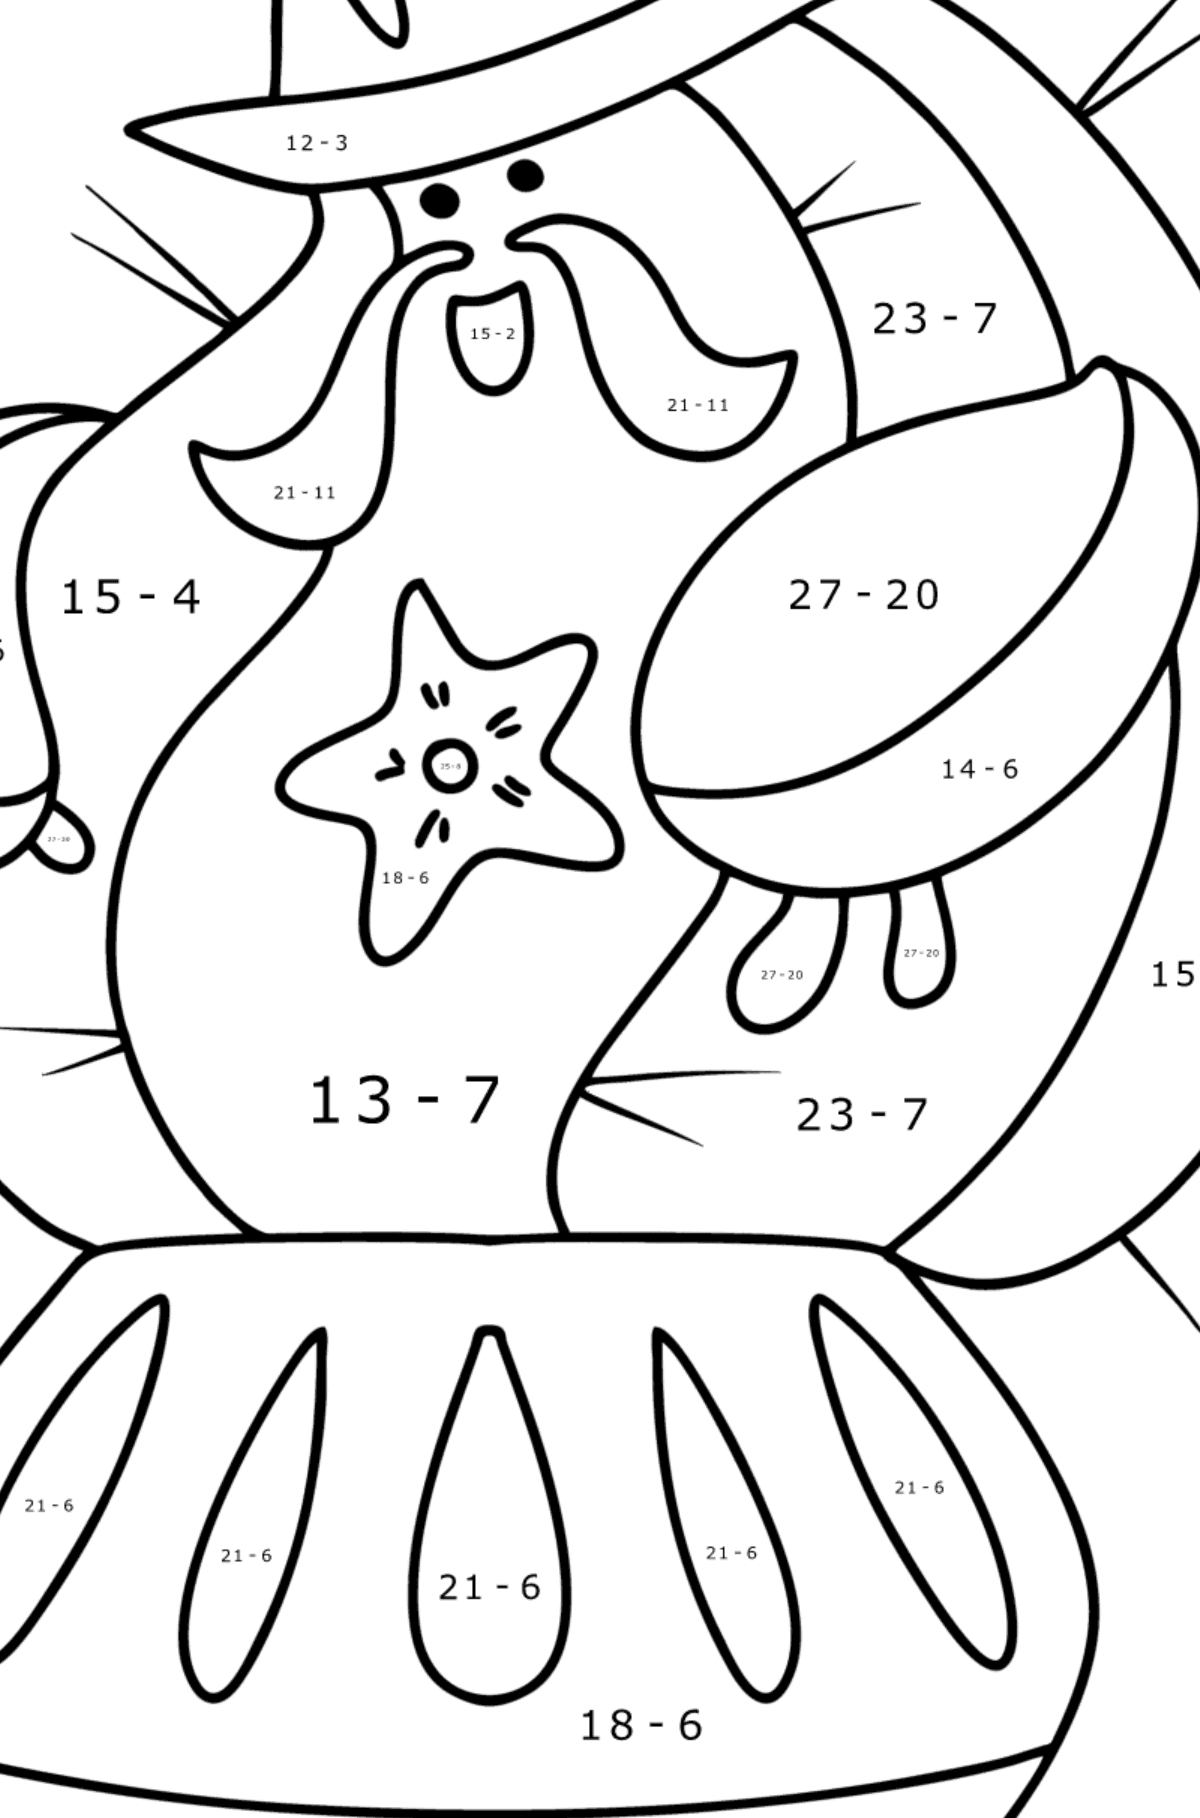 Sheriff Cactus coloring page - Math Coloring - Subtraction for Kids